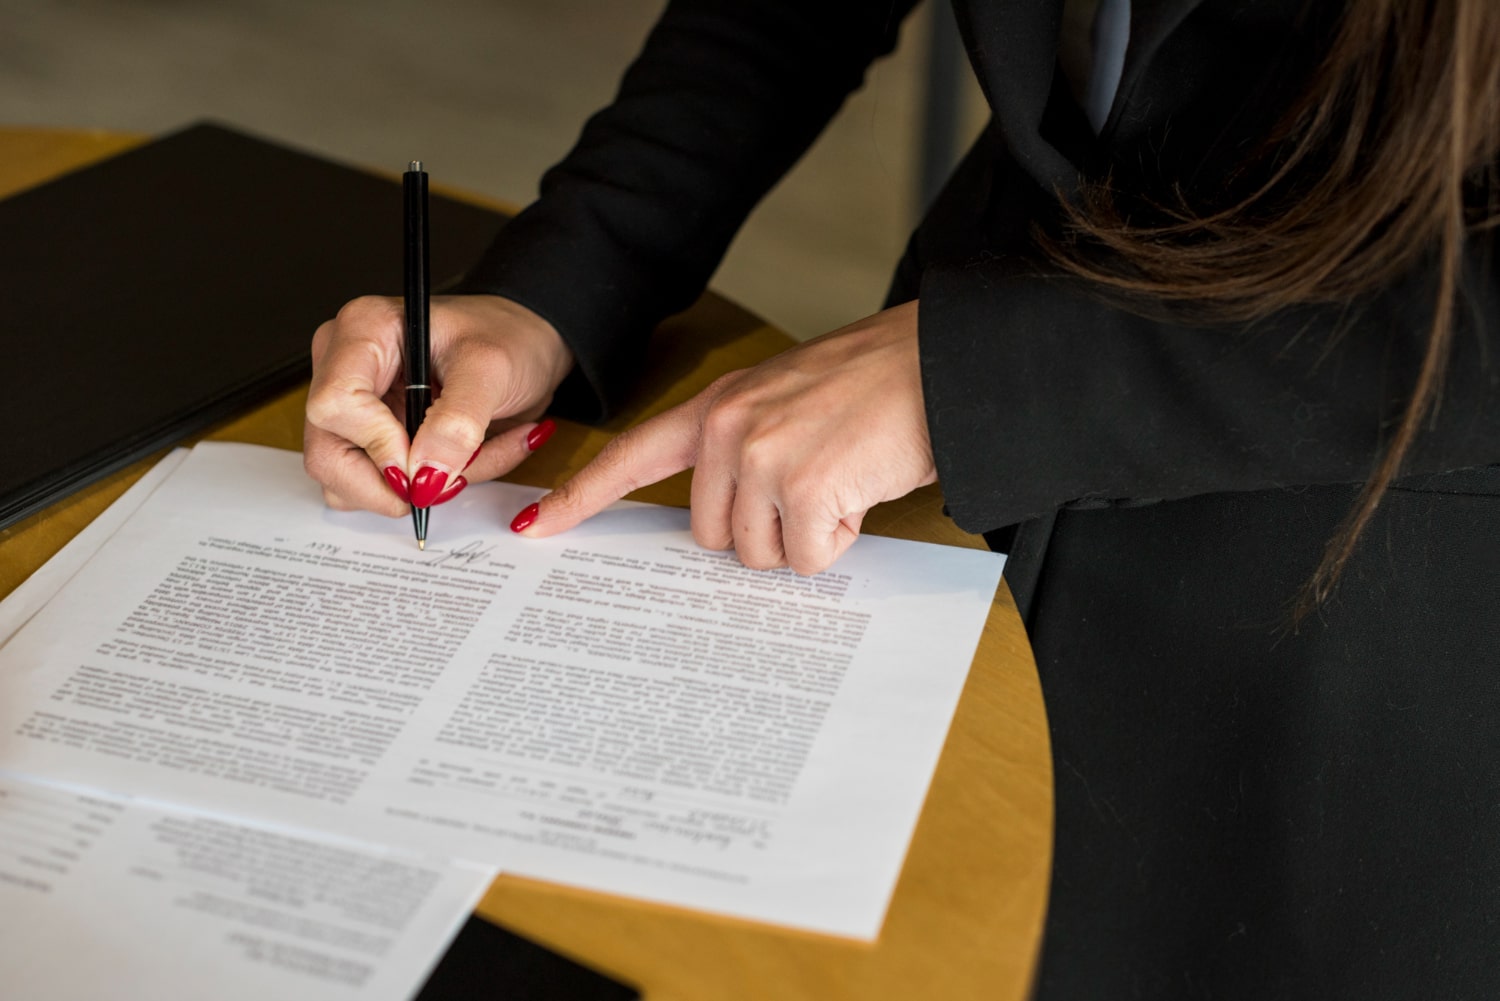 mediation document while holding a pen, indicative of reviewing terms during personal injury mediation